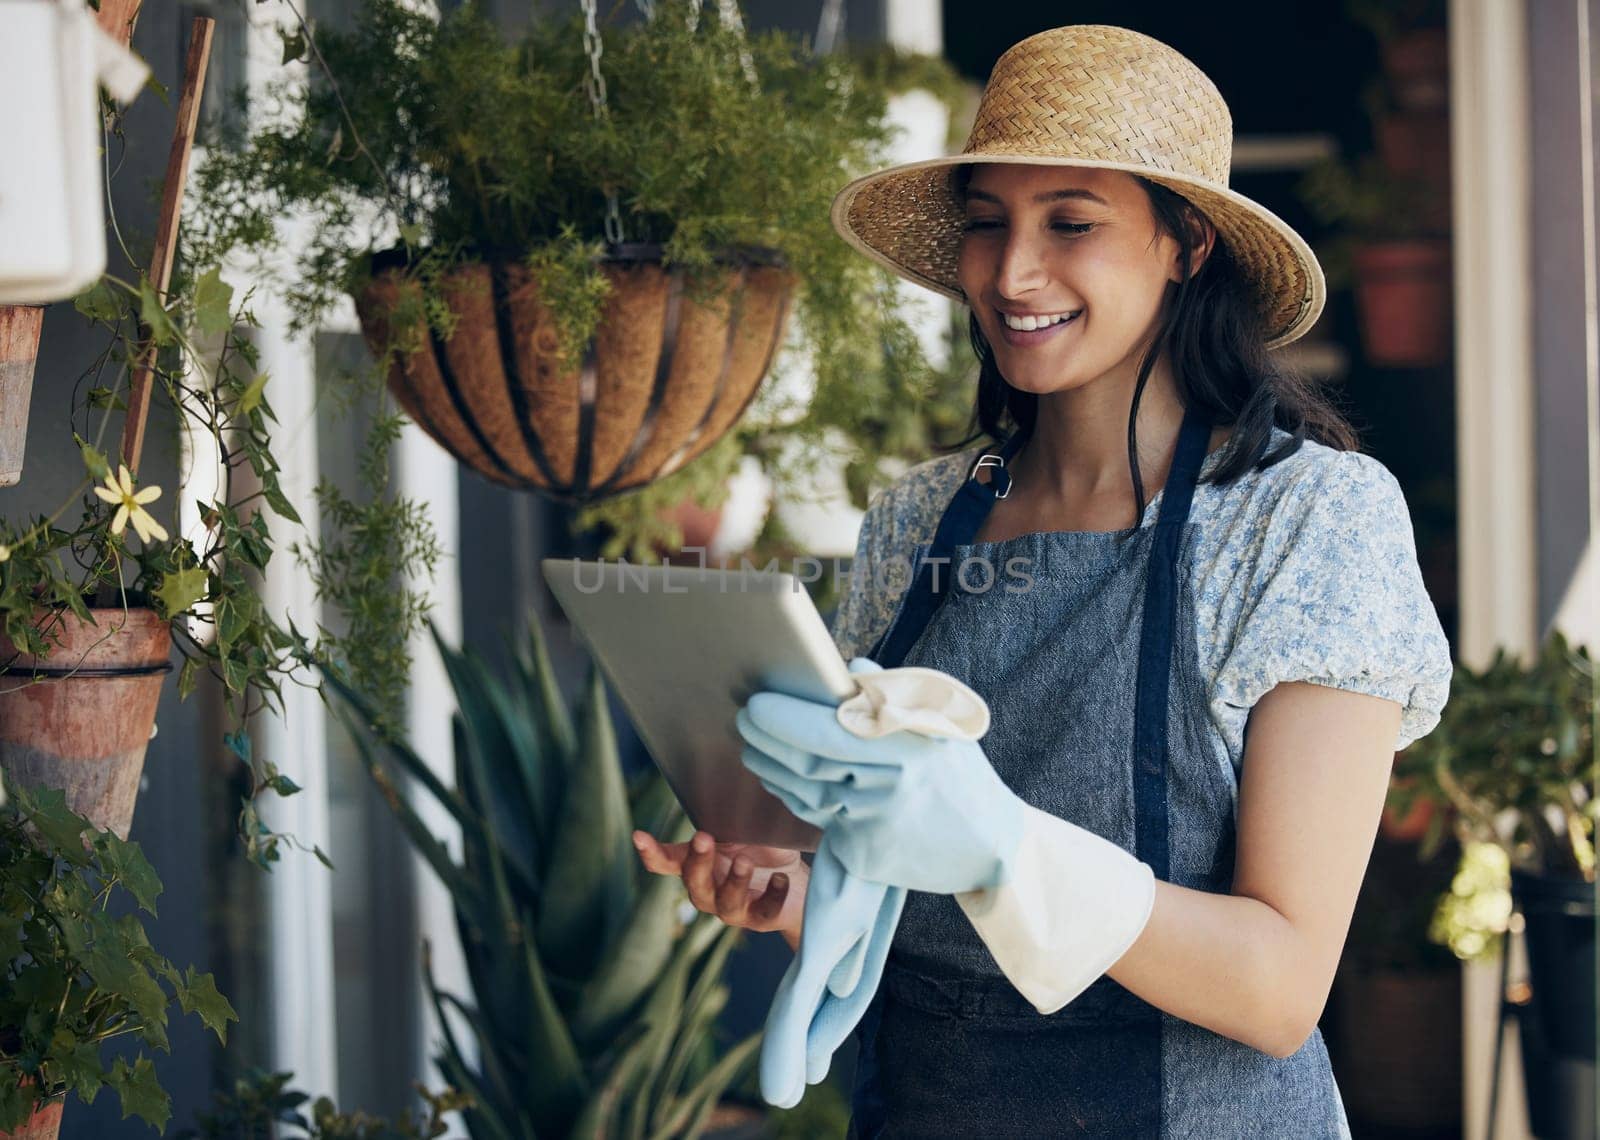 Florist, tablet or woman in nature for flowers for growth, ecology development or agriculture business. Gardener, nursery and girl farming for plants, horticulture research and floral results online by YuriArcurs